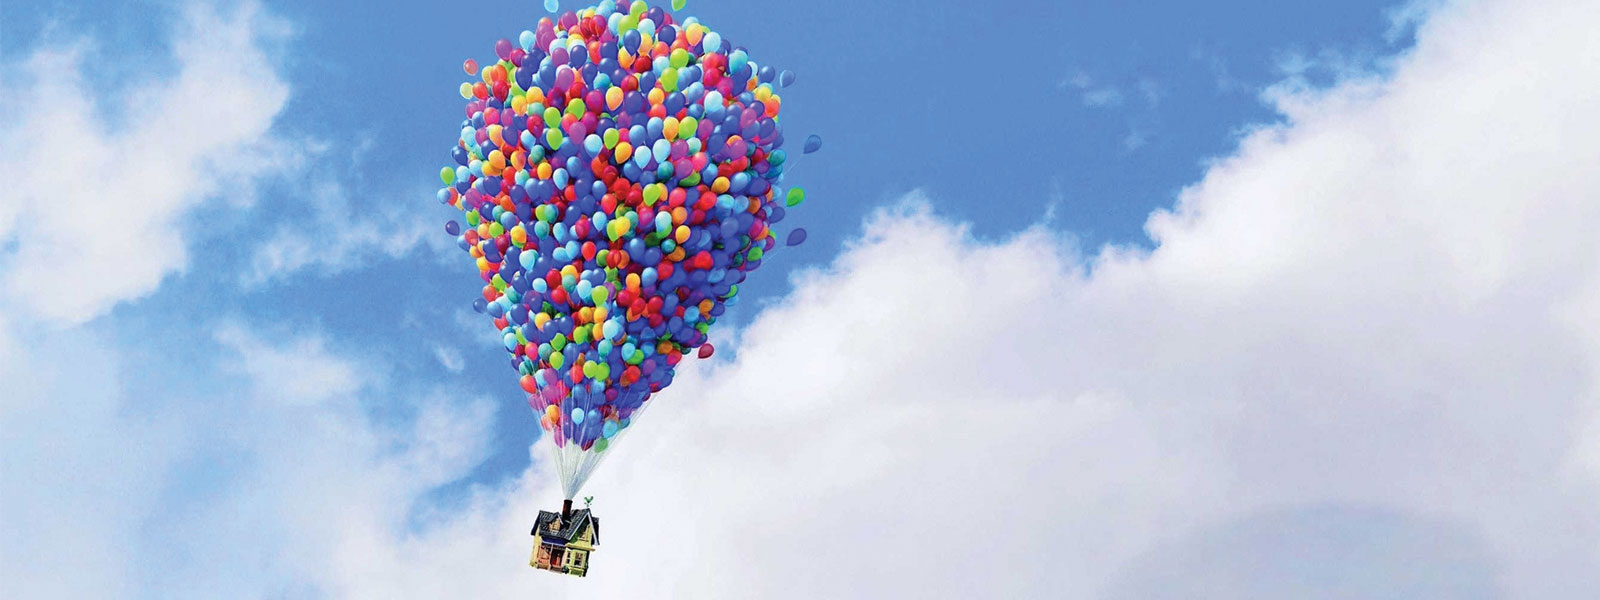 Music from "Up"